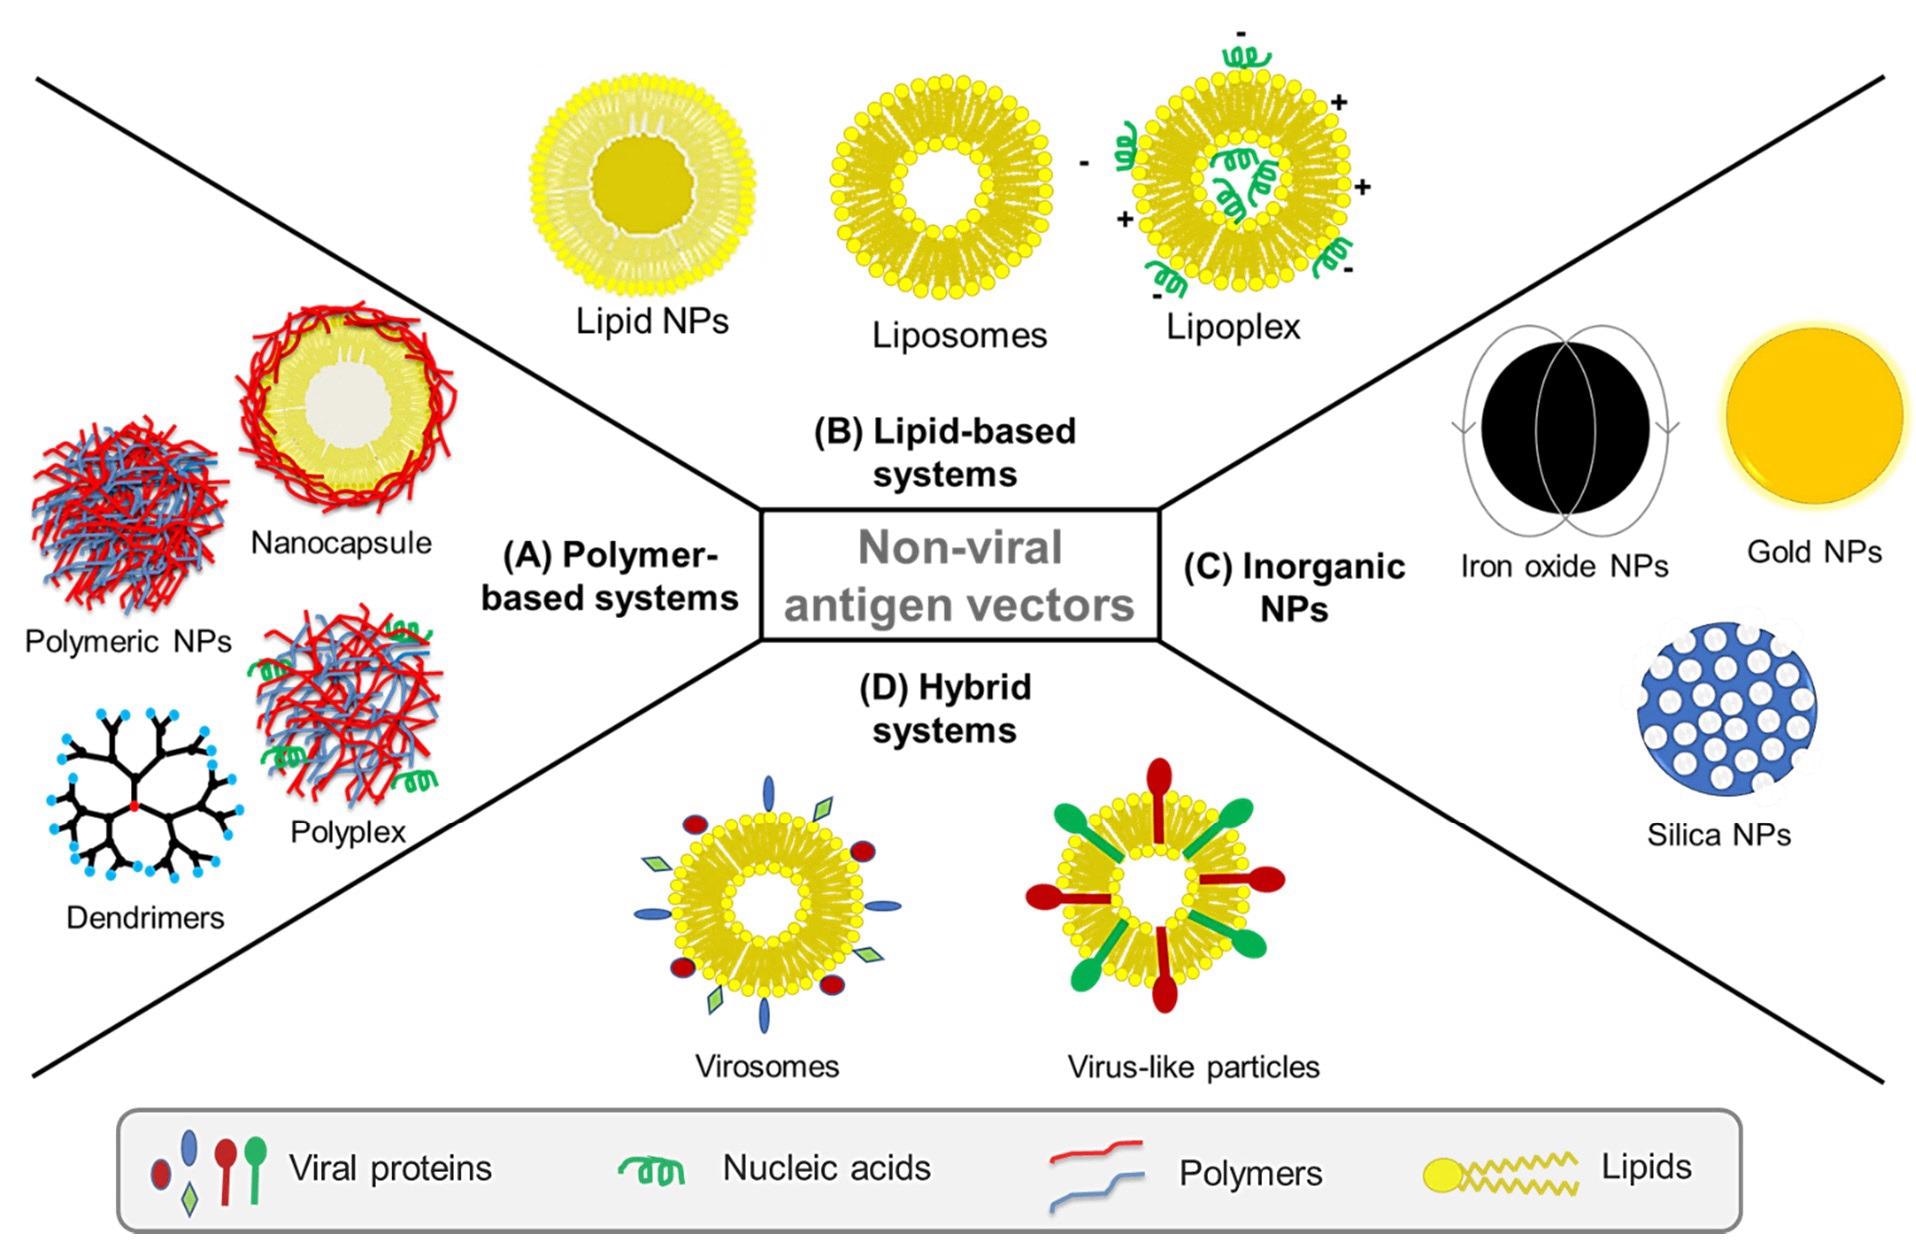 Nonviral vectors used for delivery of vaccines against viruses are classified into: (A) polymer-based systems such as polymeric nanoparticles (NPs), polyplexes, polymeric dendrimers and polymeric nanocapsules, (B) lipid-based systems such as liposomes, lipid NPs and lipoplexes, and (C) inorganic NPs such as iron oxide, gold, and mesoporous silica NPs. In addition to nonviral vectors, (D) hybrid systems such as virosomes and virus-like particles (VLPs) have been also developed to combine nonviral systems like liposomes with viral elements, for instance decorating liposomes with viral glycoproteins to imbue the system with viral immunogenicity.